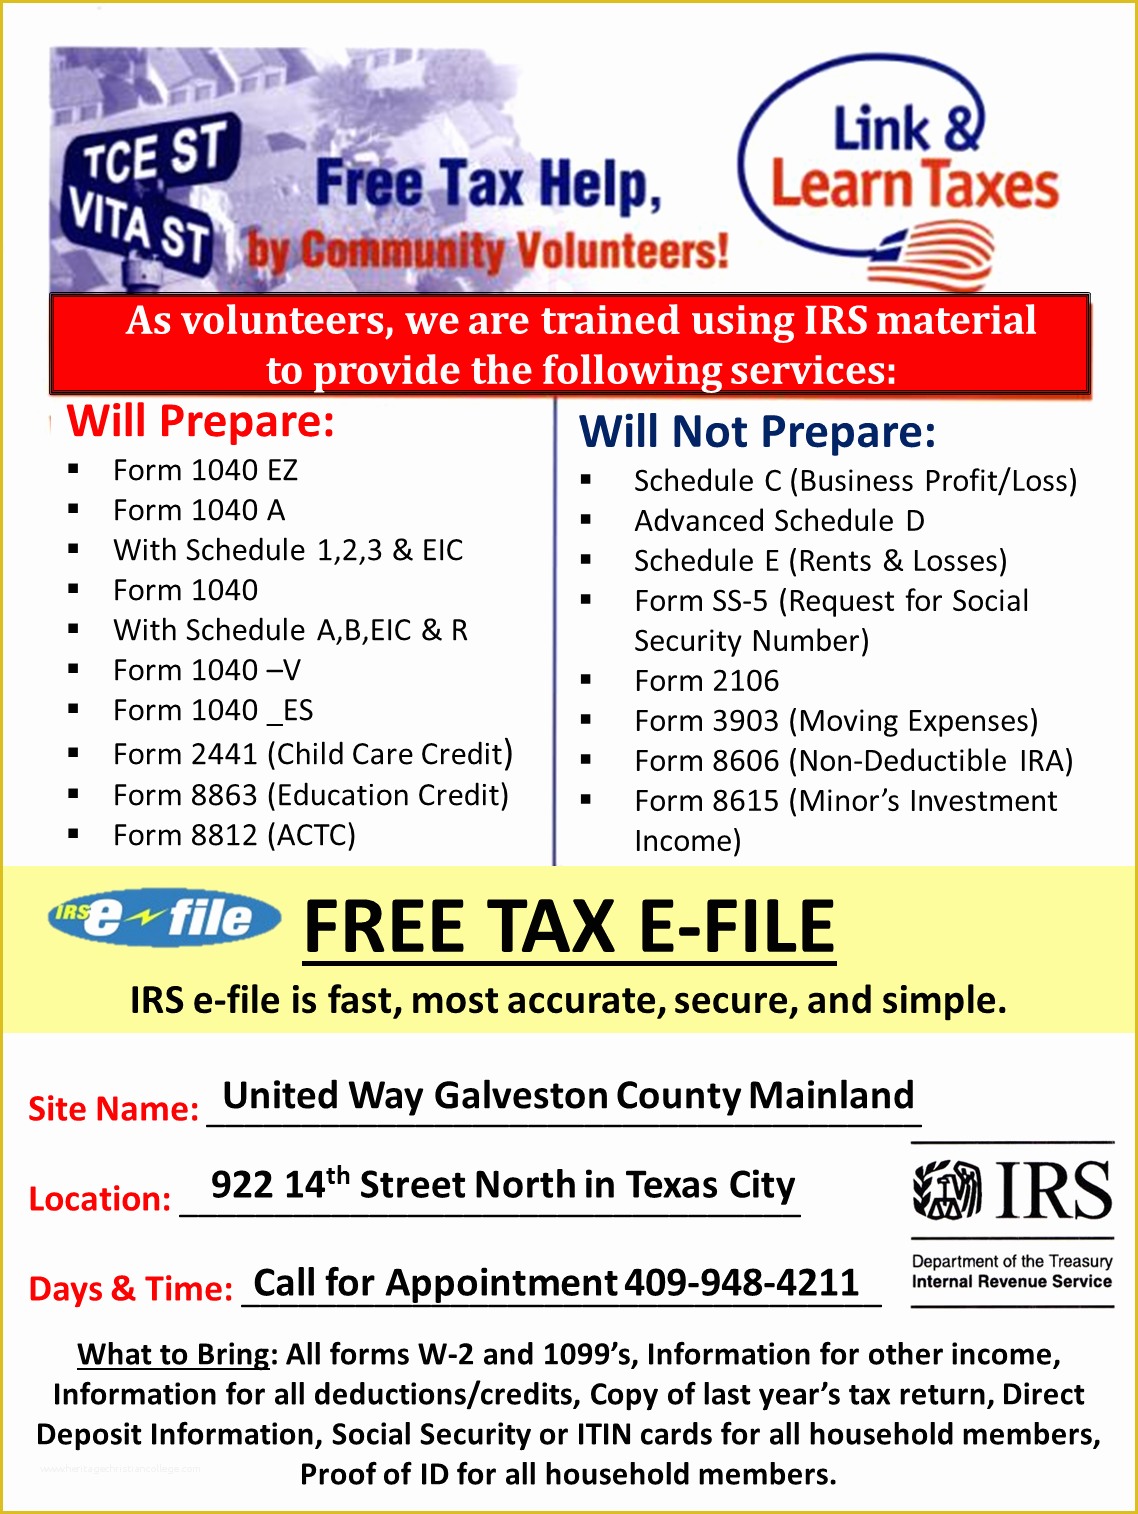 Free Tax Preparation Flyers Templates Of In E Tax Flyer Templates Yourweek 053d4beca25e